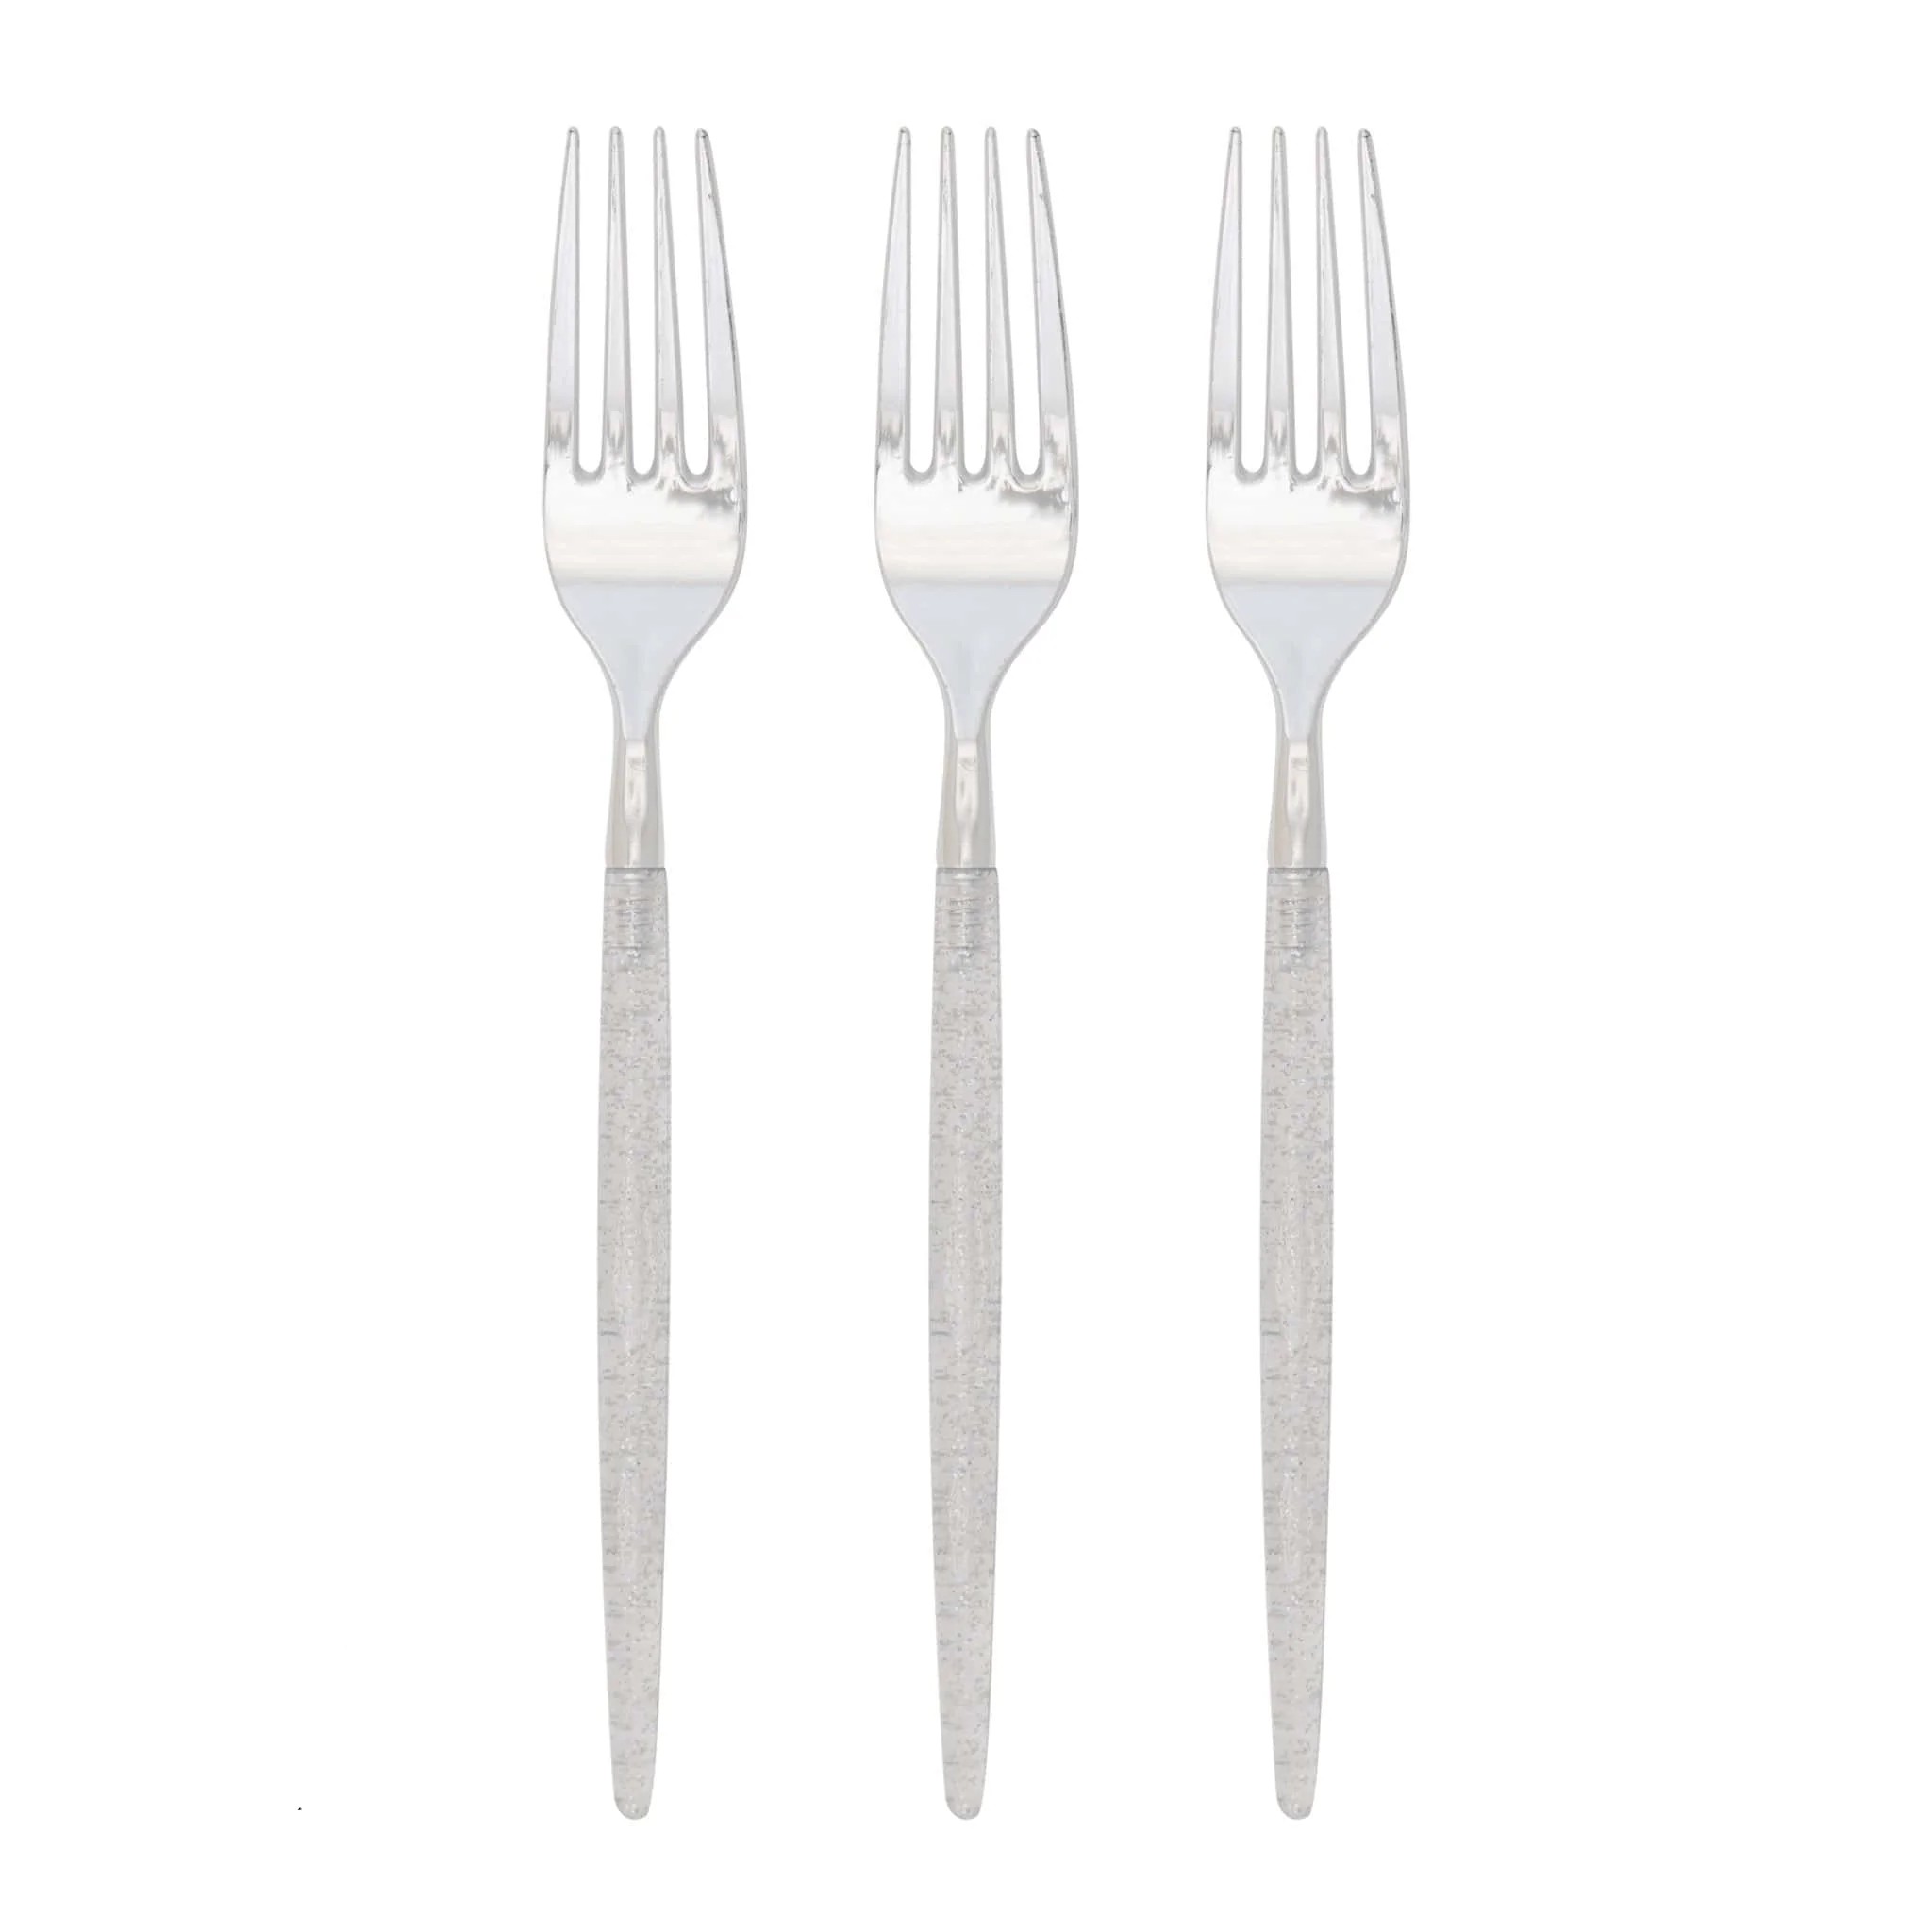 Luxe Party Chic Silver Glitter Two Tone Plastic Forks - 32 pcs